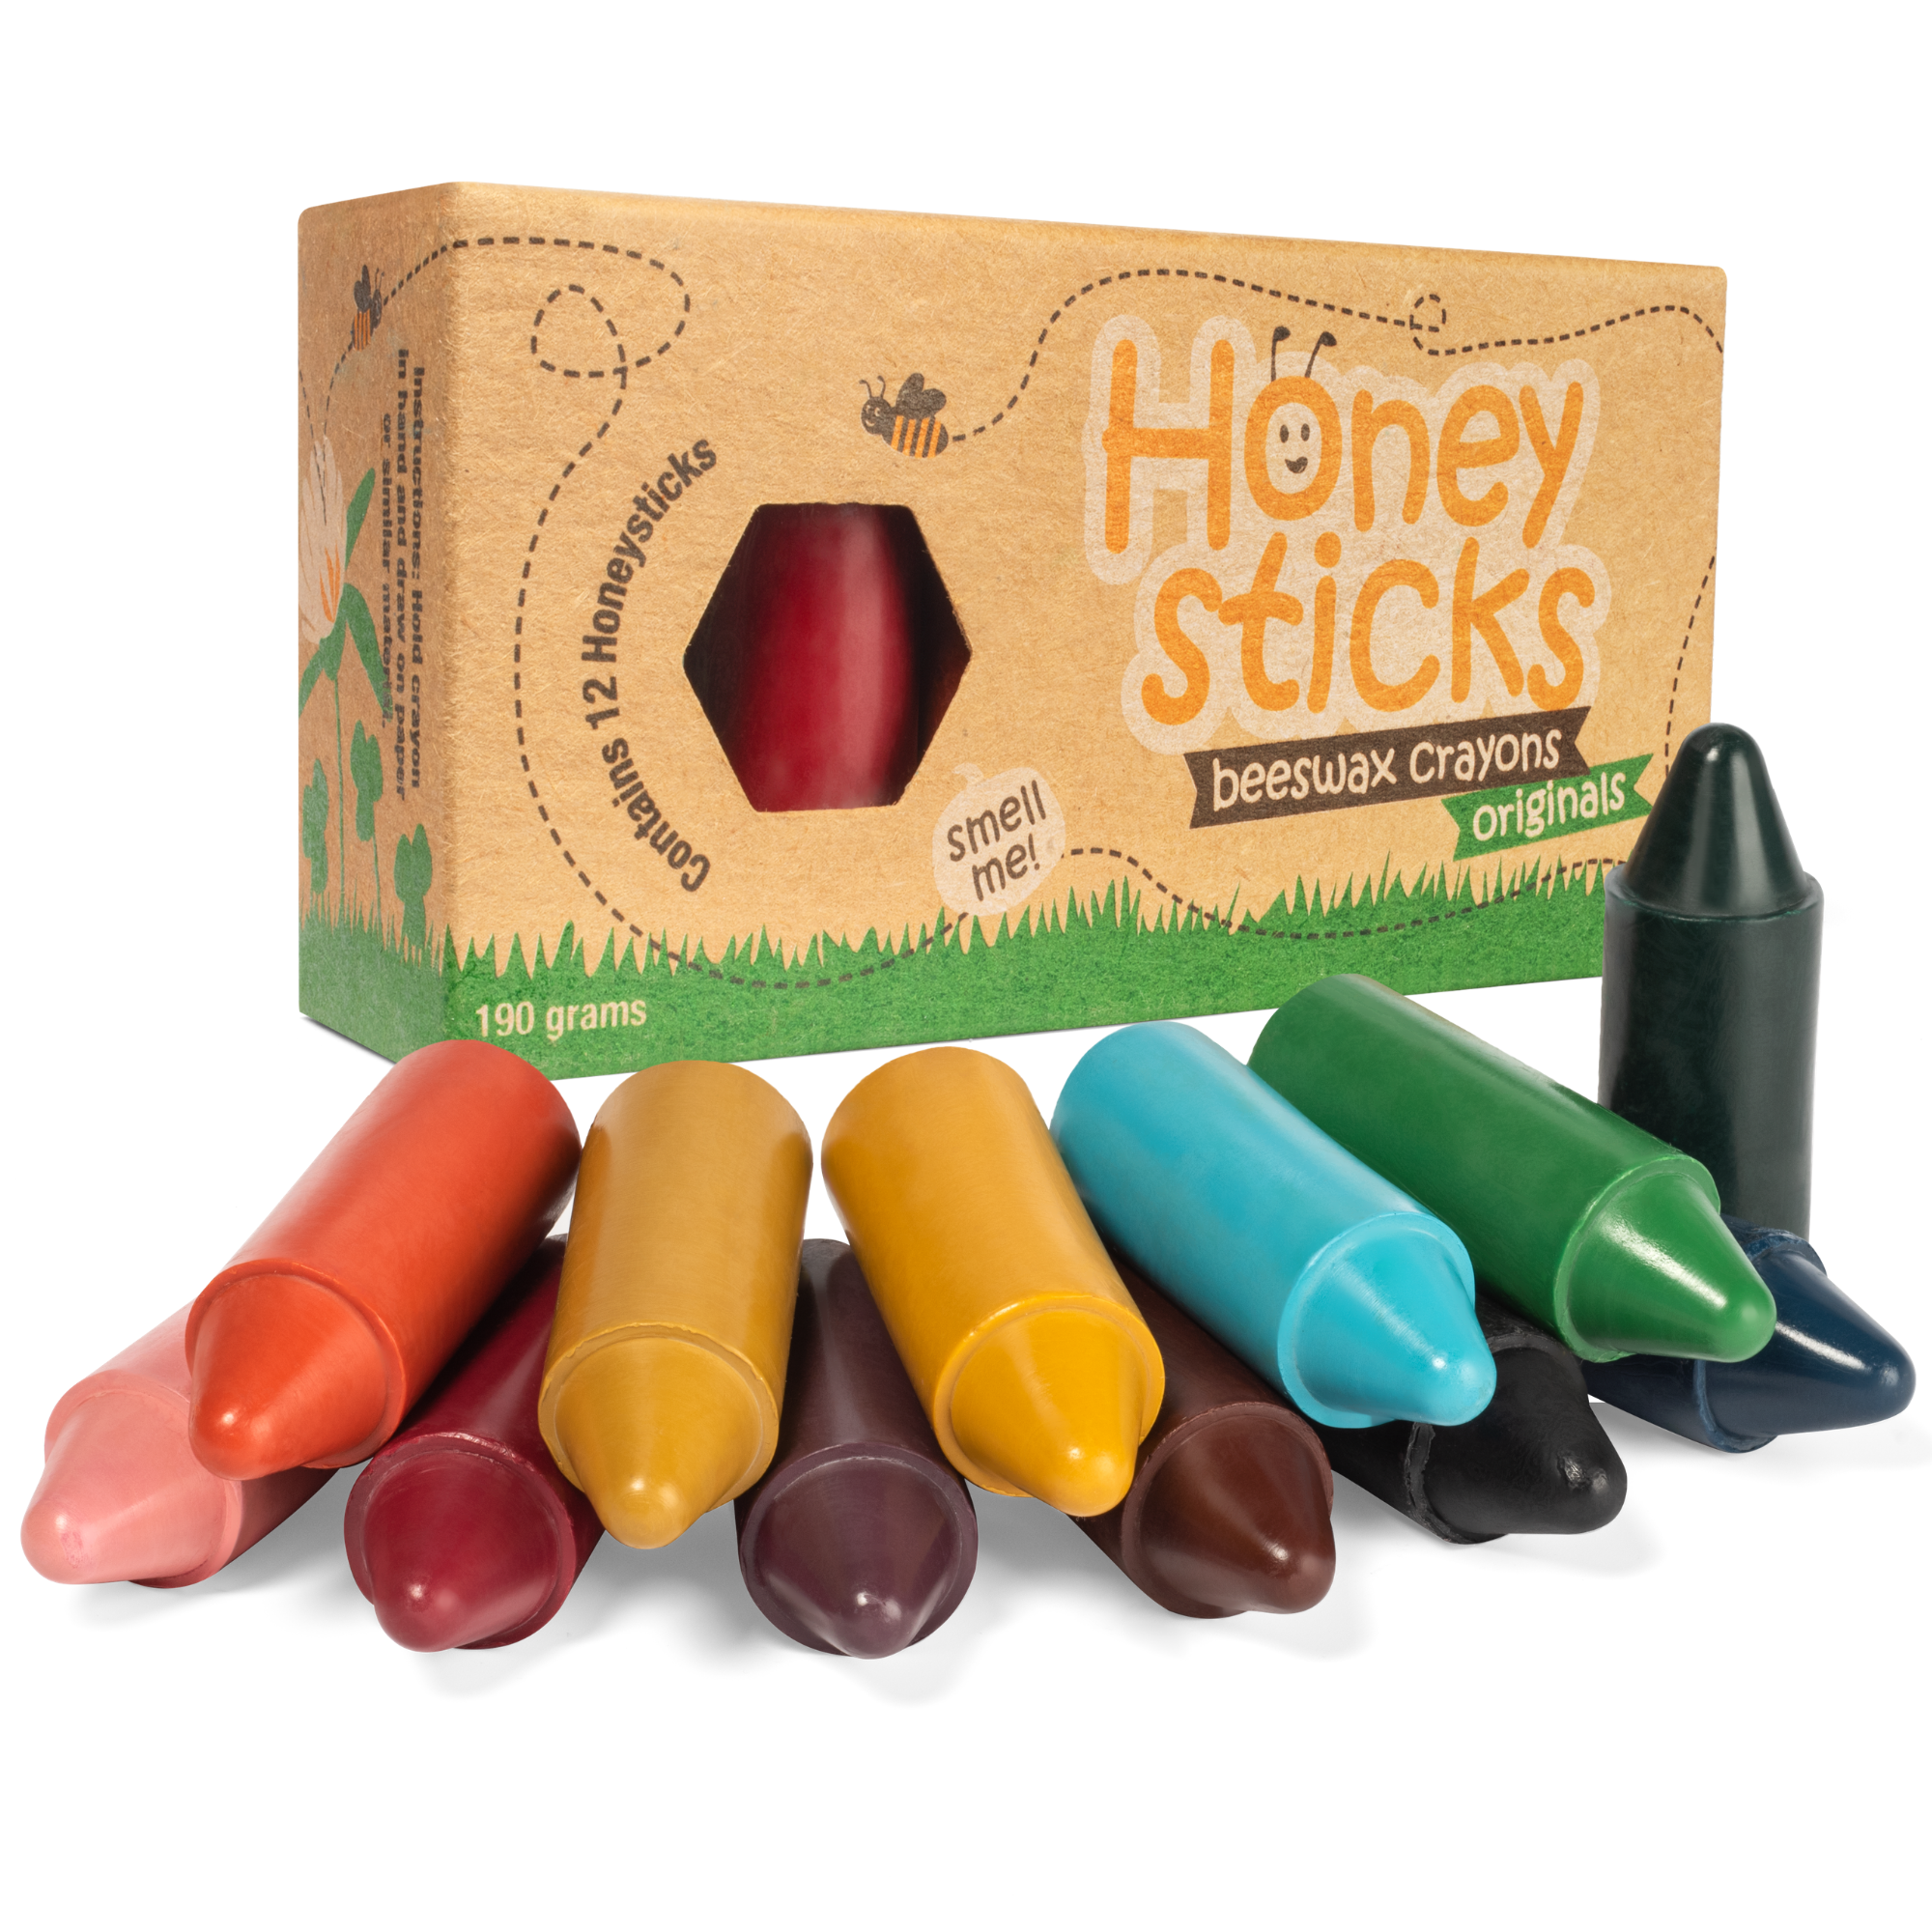 Honeysticks 100% Pure Beeswax Crayons (12 Pack) - Non Toxic Crayons Handmade with Natural Beeswax and Food Grade Colours - Child / Toddler Safe, Easy to Hold and Use - Sustainably Made in New Zealand - image 2 of 6